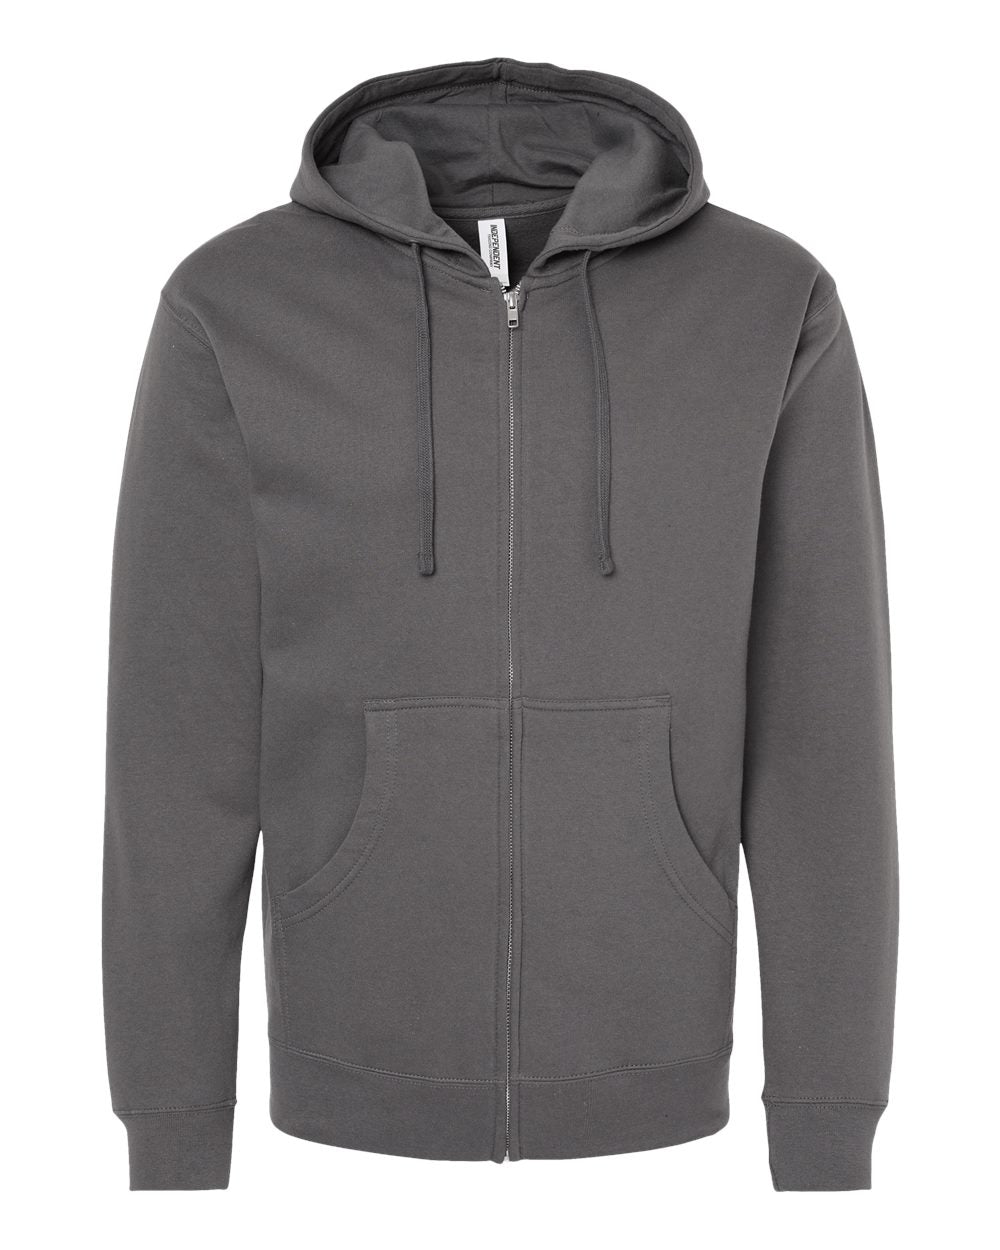 Independent Trading Co. Midweight Full-Zip Hooded Sweatshirt